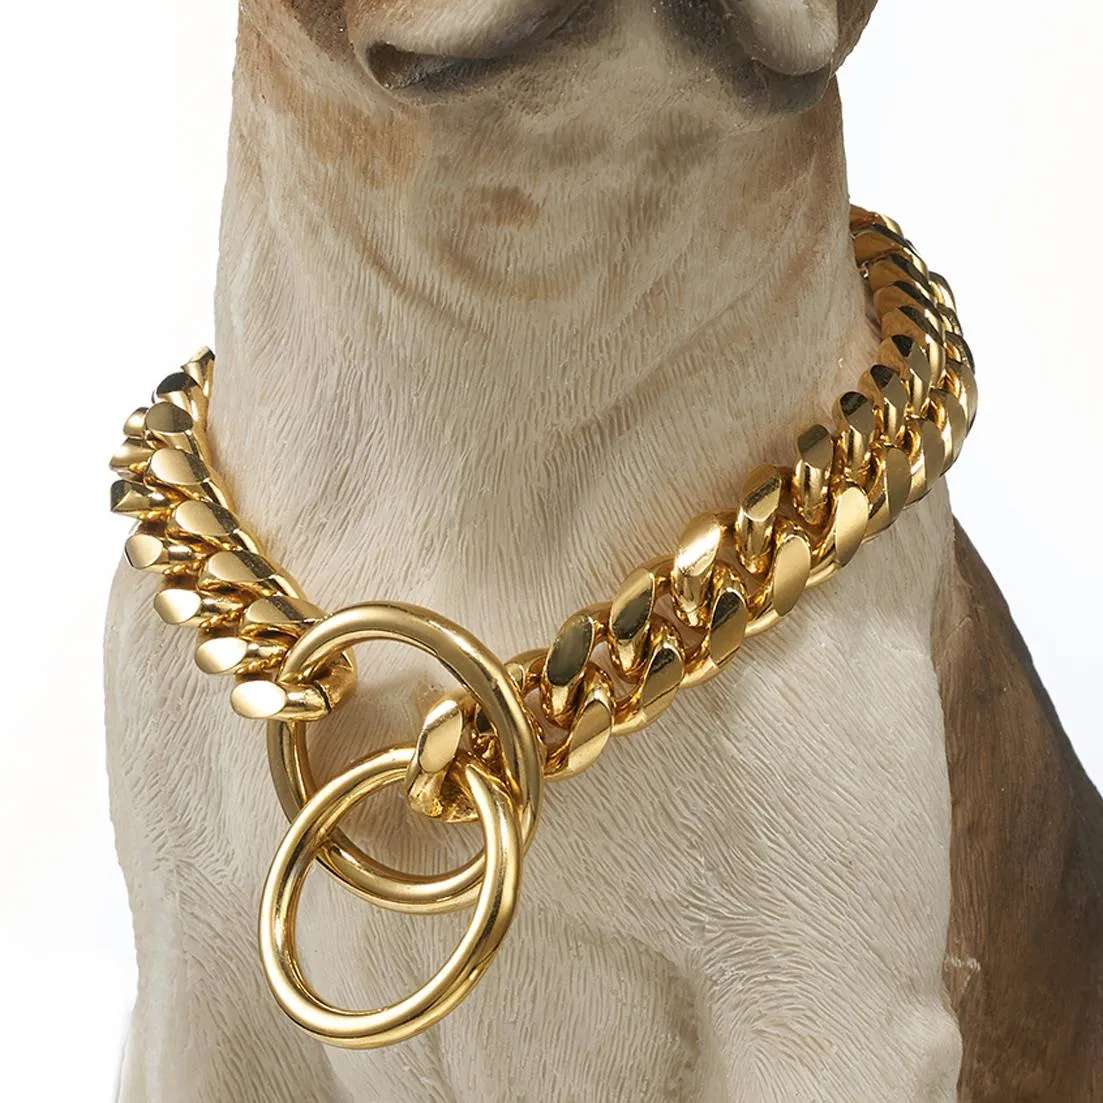 Necklaces 10/12/14/16mm Stainless Chain Dog Collar Gold Color Cuban Link Dog Slip Chain Choke Collar Steel Strong Slip Dog Collars for Pet